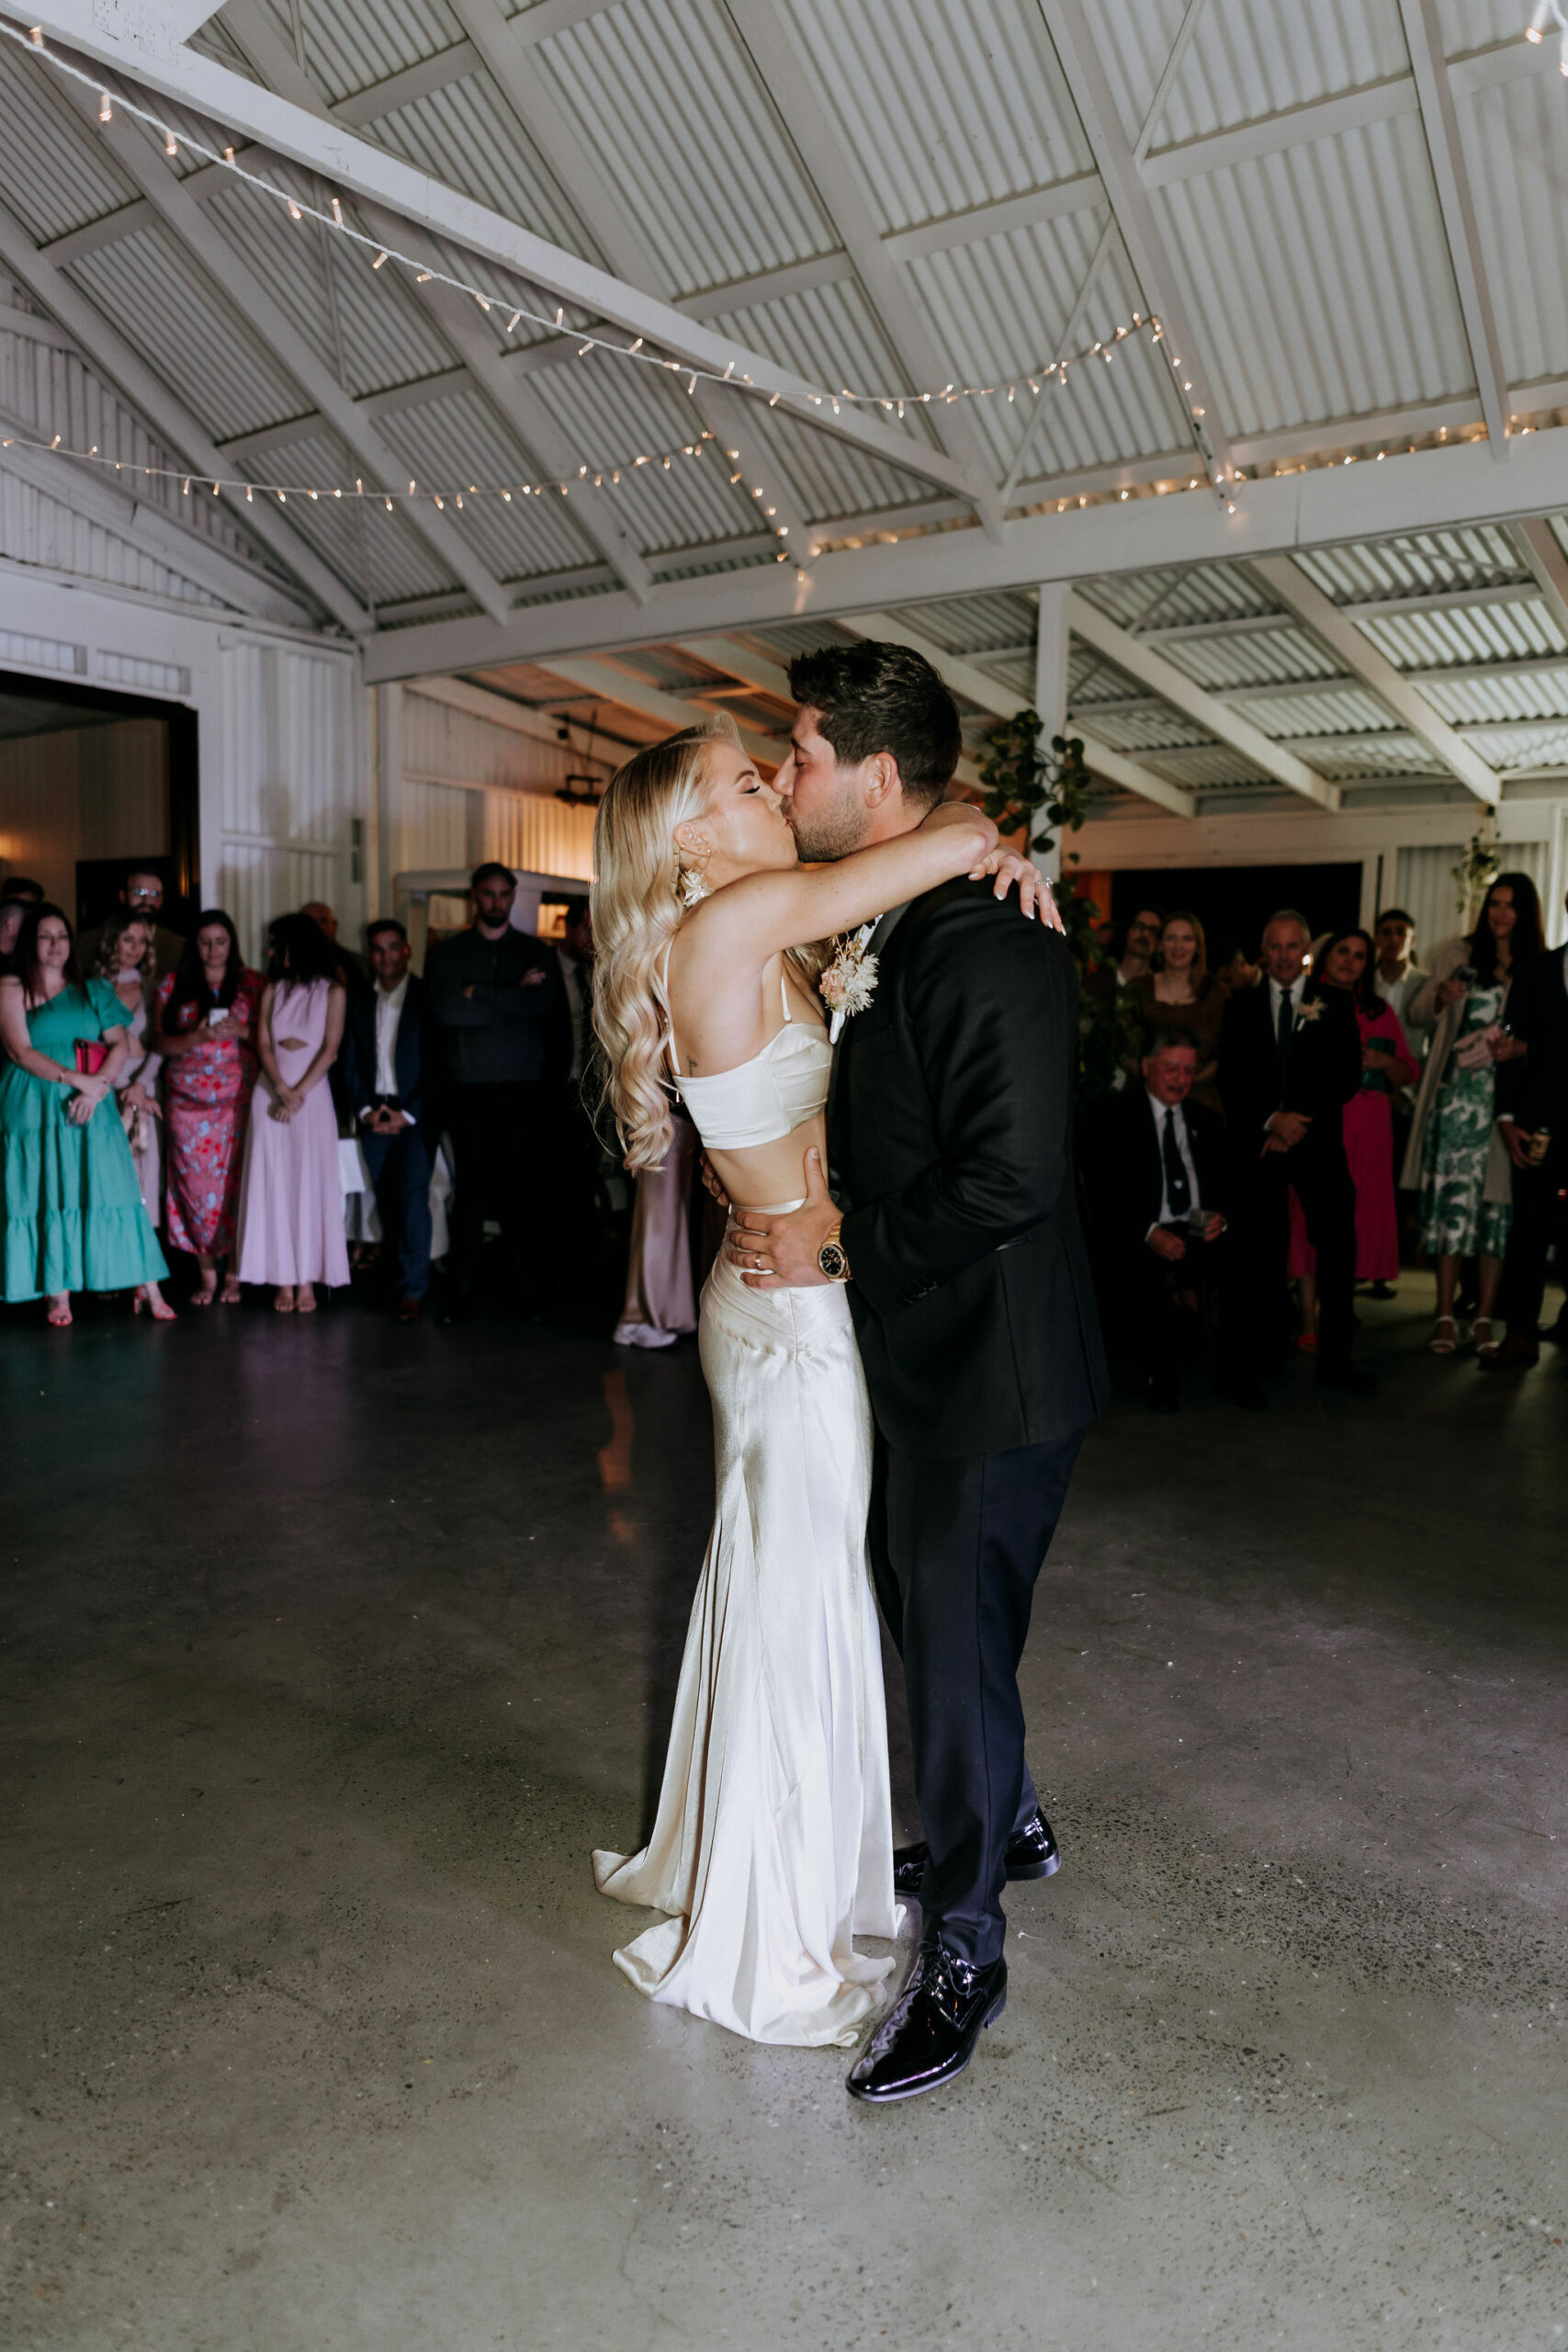 Rachel and Alex's Barn Events wedding captured by Chamore Creations